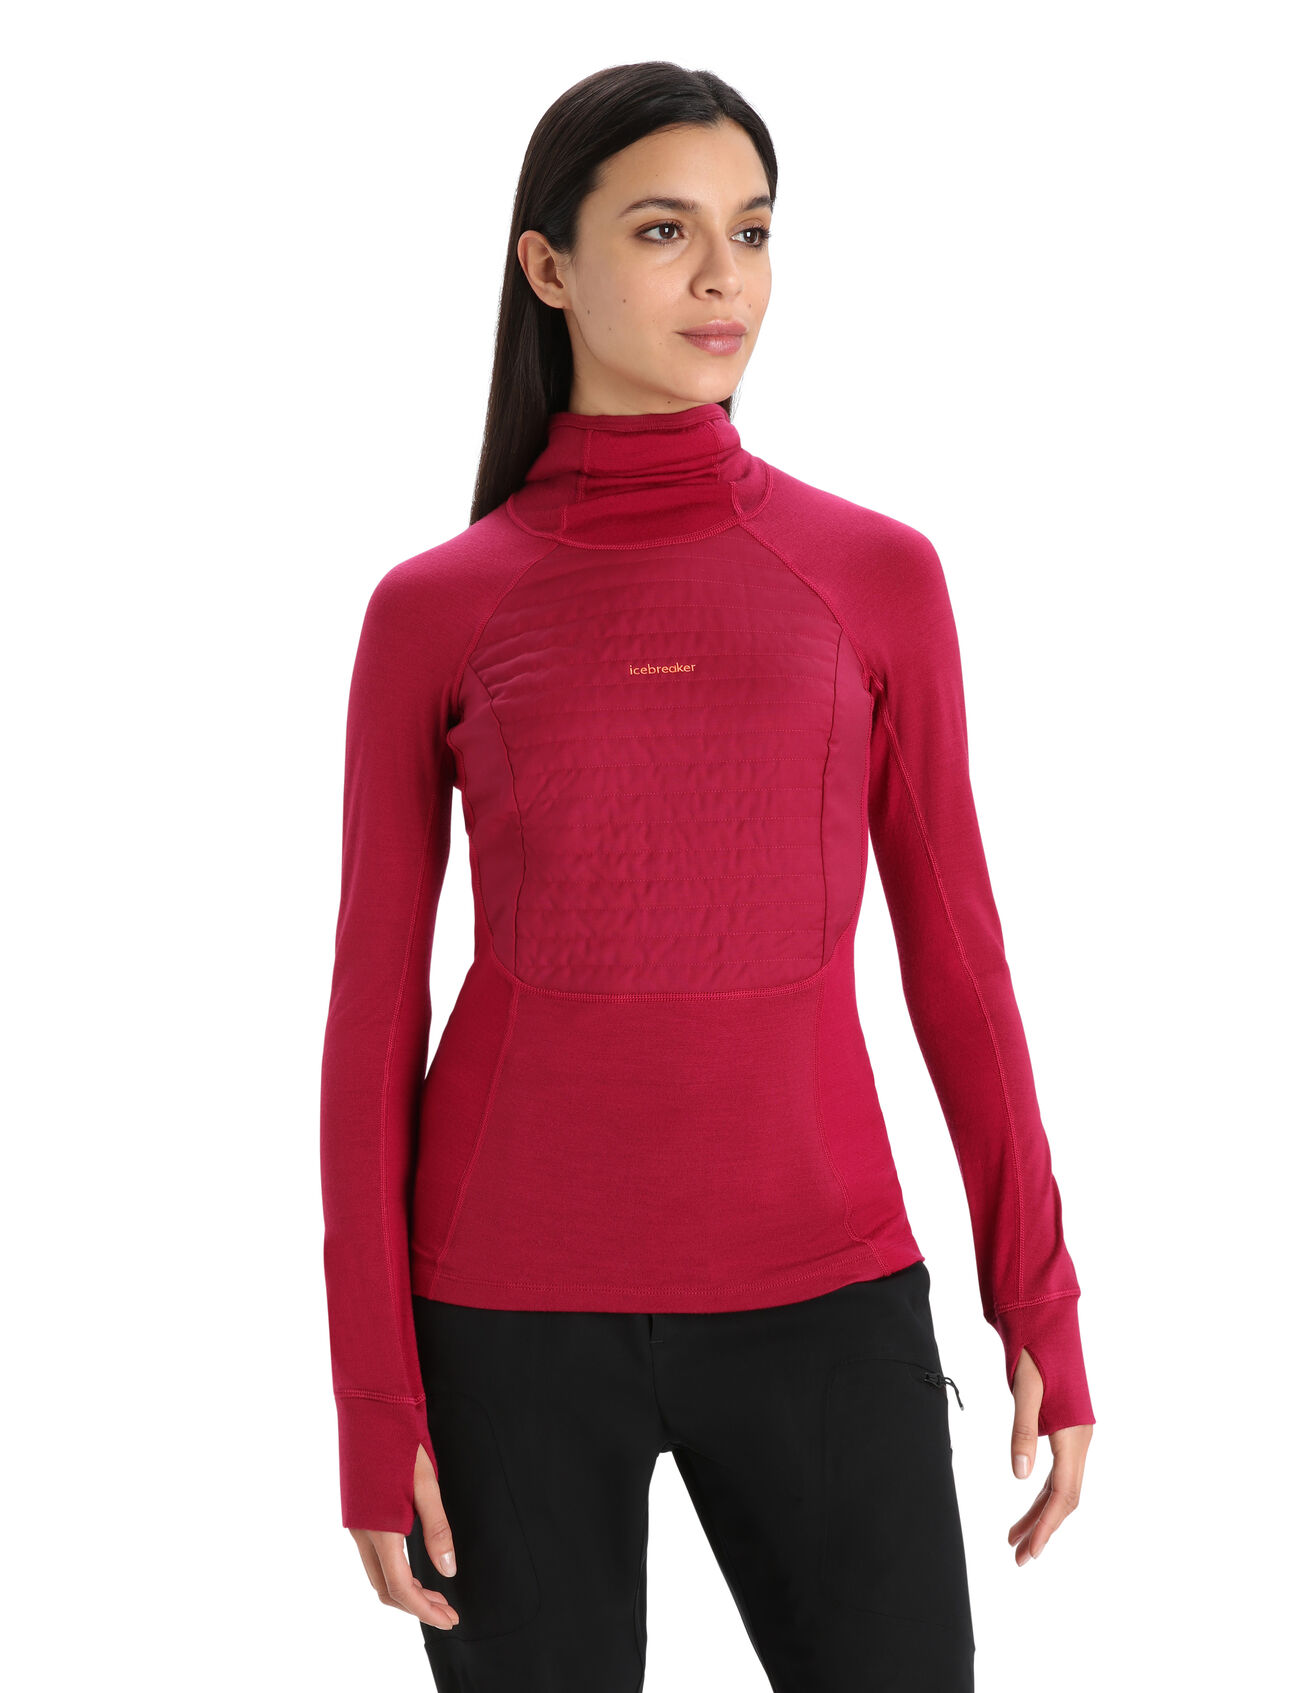 Womens ZoneKnit™ Merino Insulated Long Sleeve Thermal Hoodie A high-performance merino wool base layer optimized for intense activity and technical mountain pursuits, the ZoneKnit™ Insulated Long Sleeve Hoodie combines our ZoneKnit engineered body-mapping with quilted MerinoLoft™ insulation at the chest for added warmth.